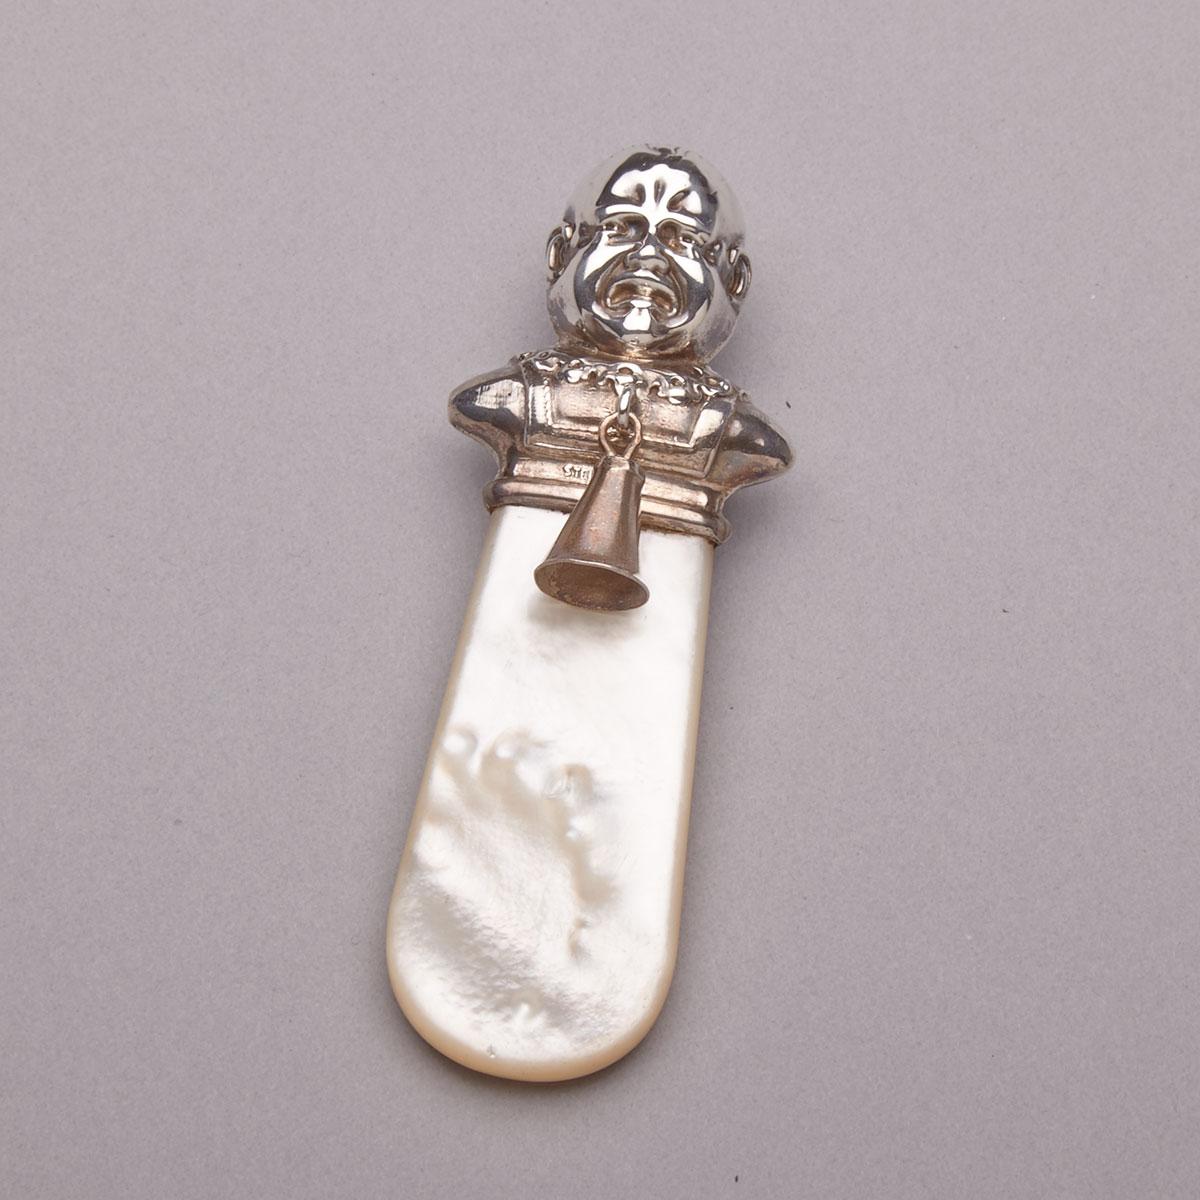 American Silver and Mother-of-Pearl Child’s Rattle, early 20th century